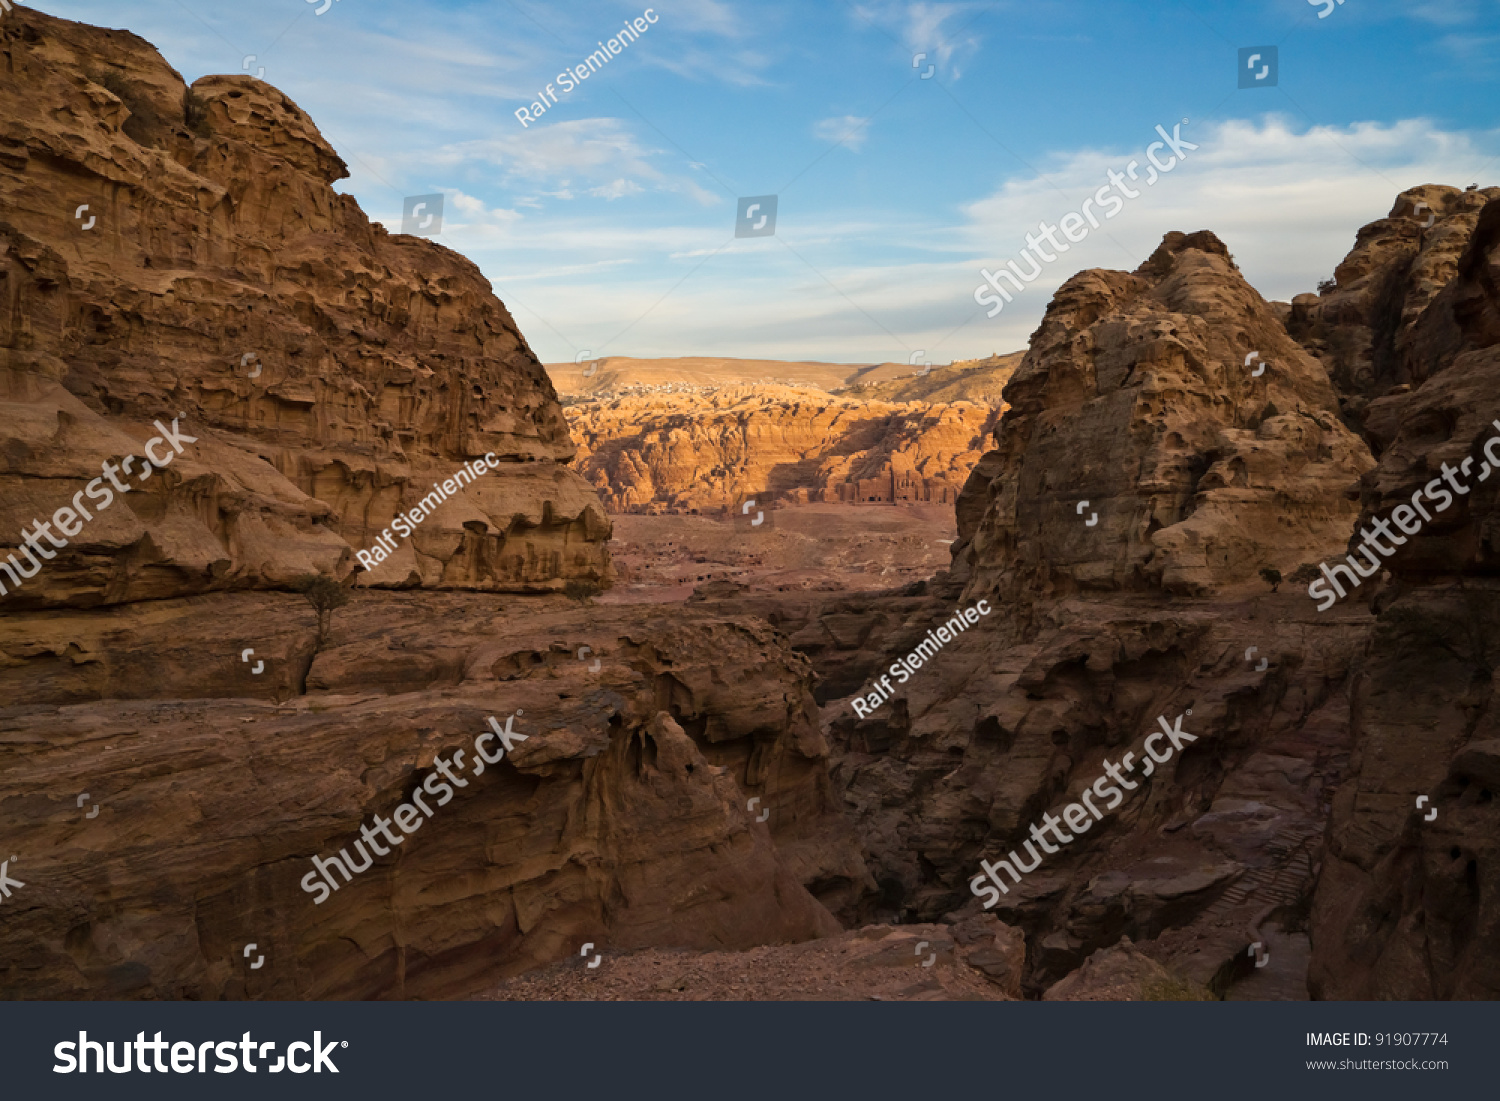 View over the valley of the ancient city Petra in todays Jordan. #91907774